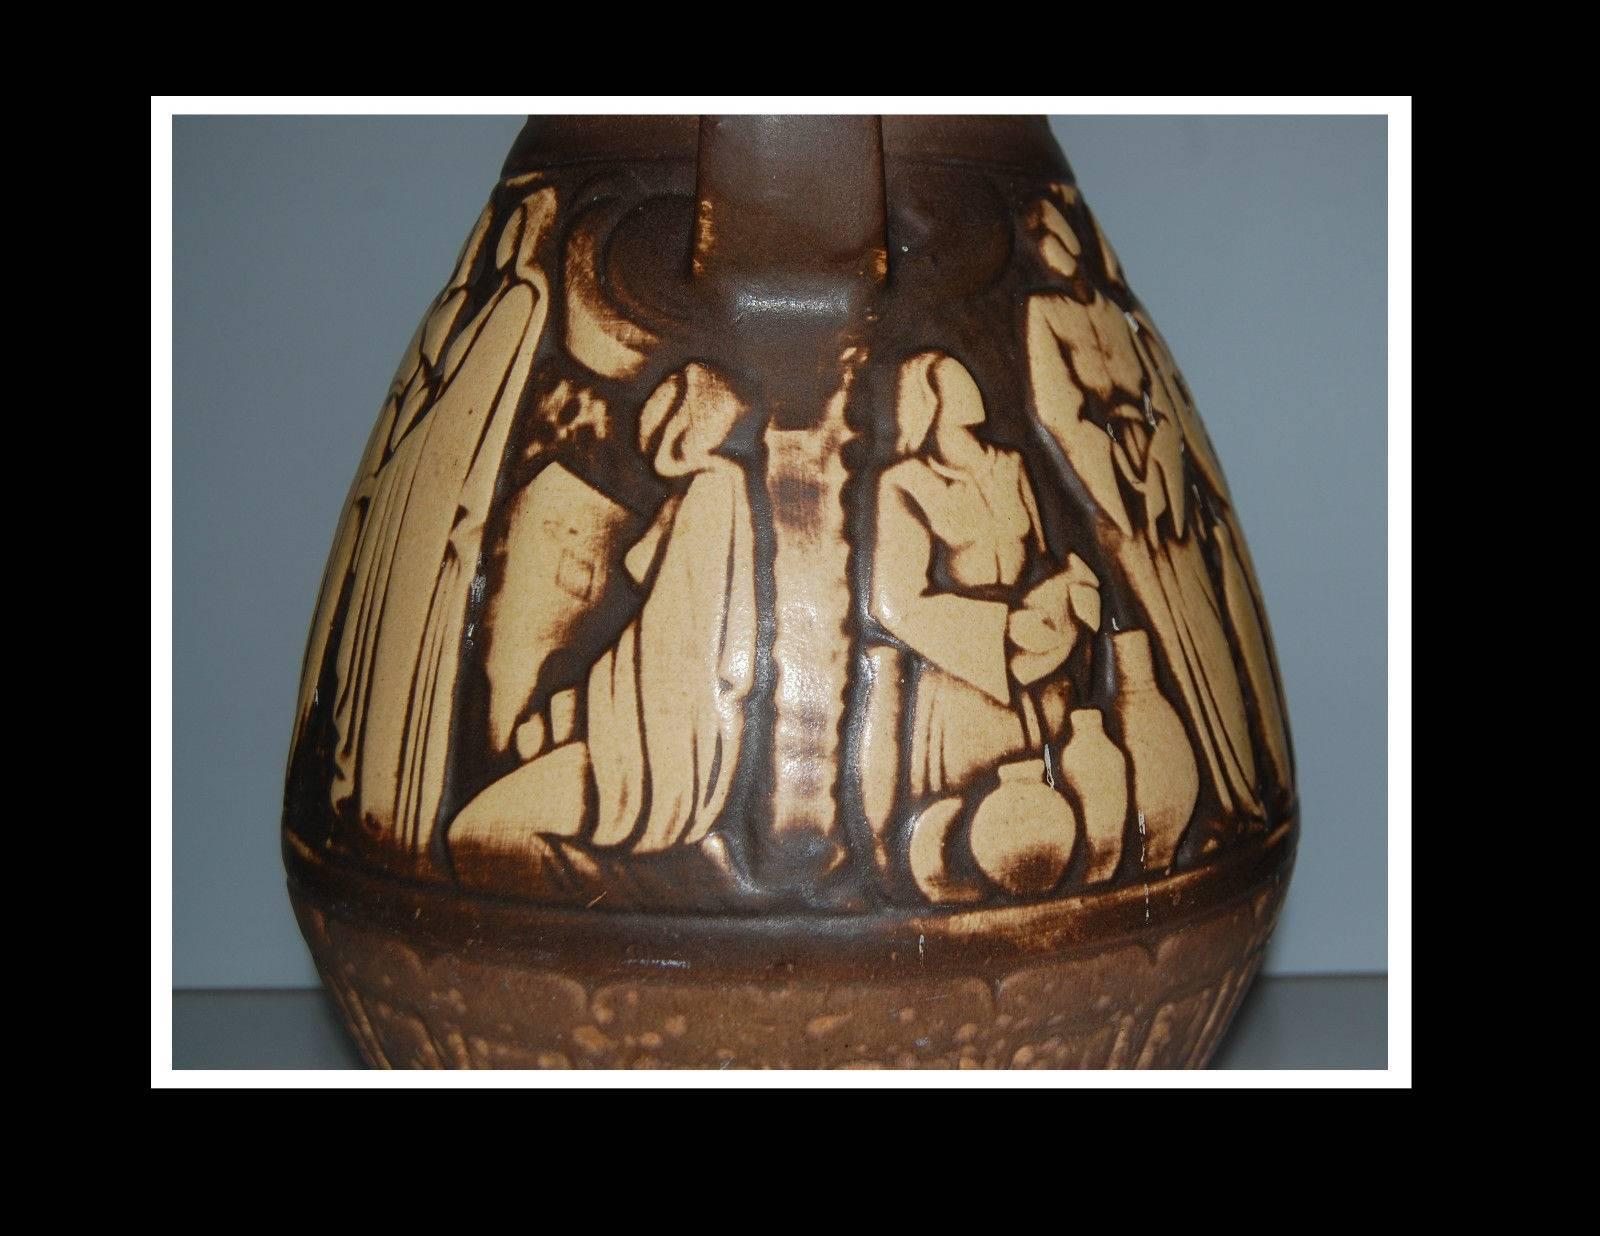 Ceramic Amphora Hand Relief Carved Vase Greek Muses and Arts